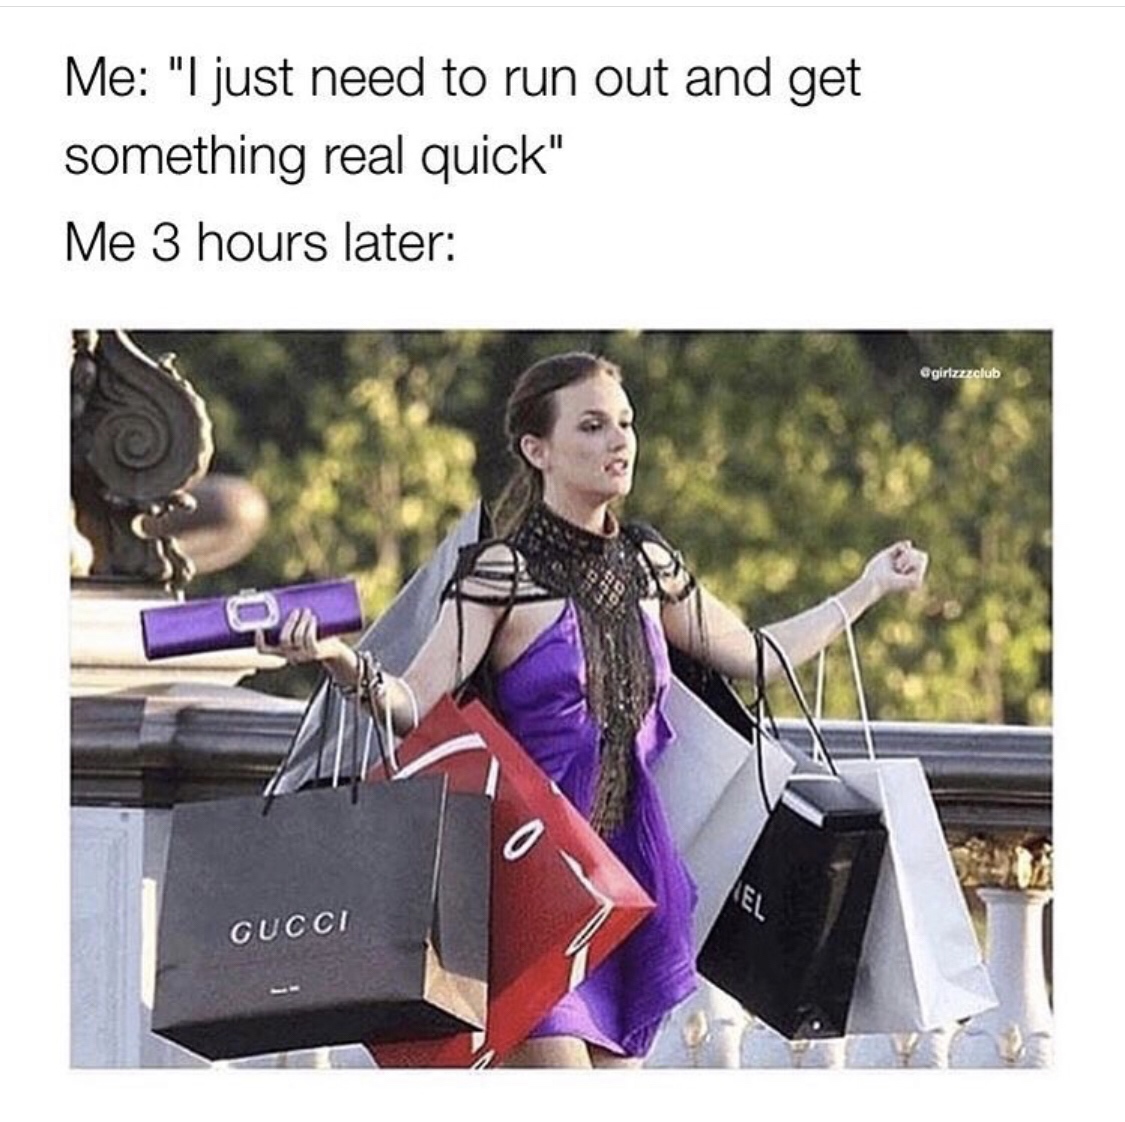 shopaholic meme - Me "I just need to run out and get something real quick" Me 3 hours later egirlzzzclub Cucci